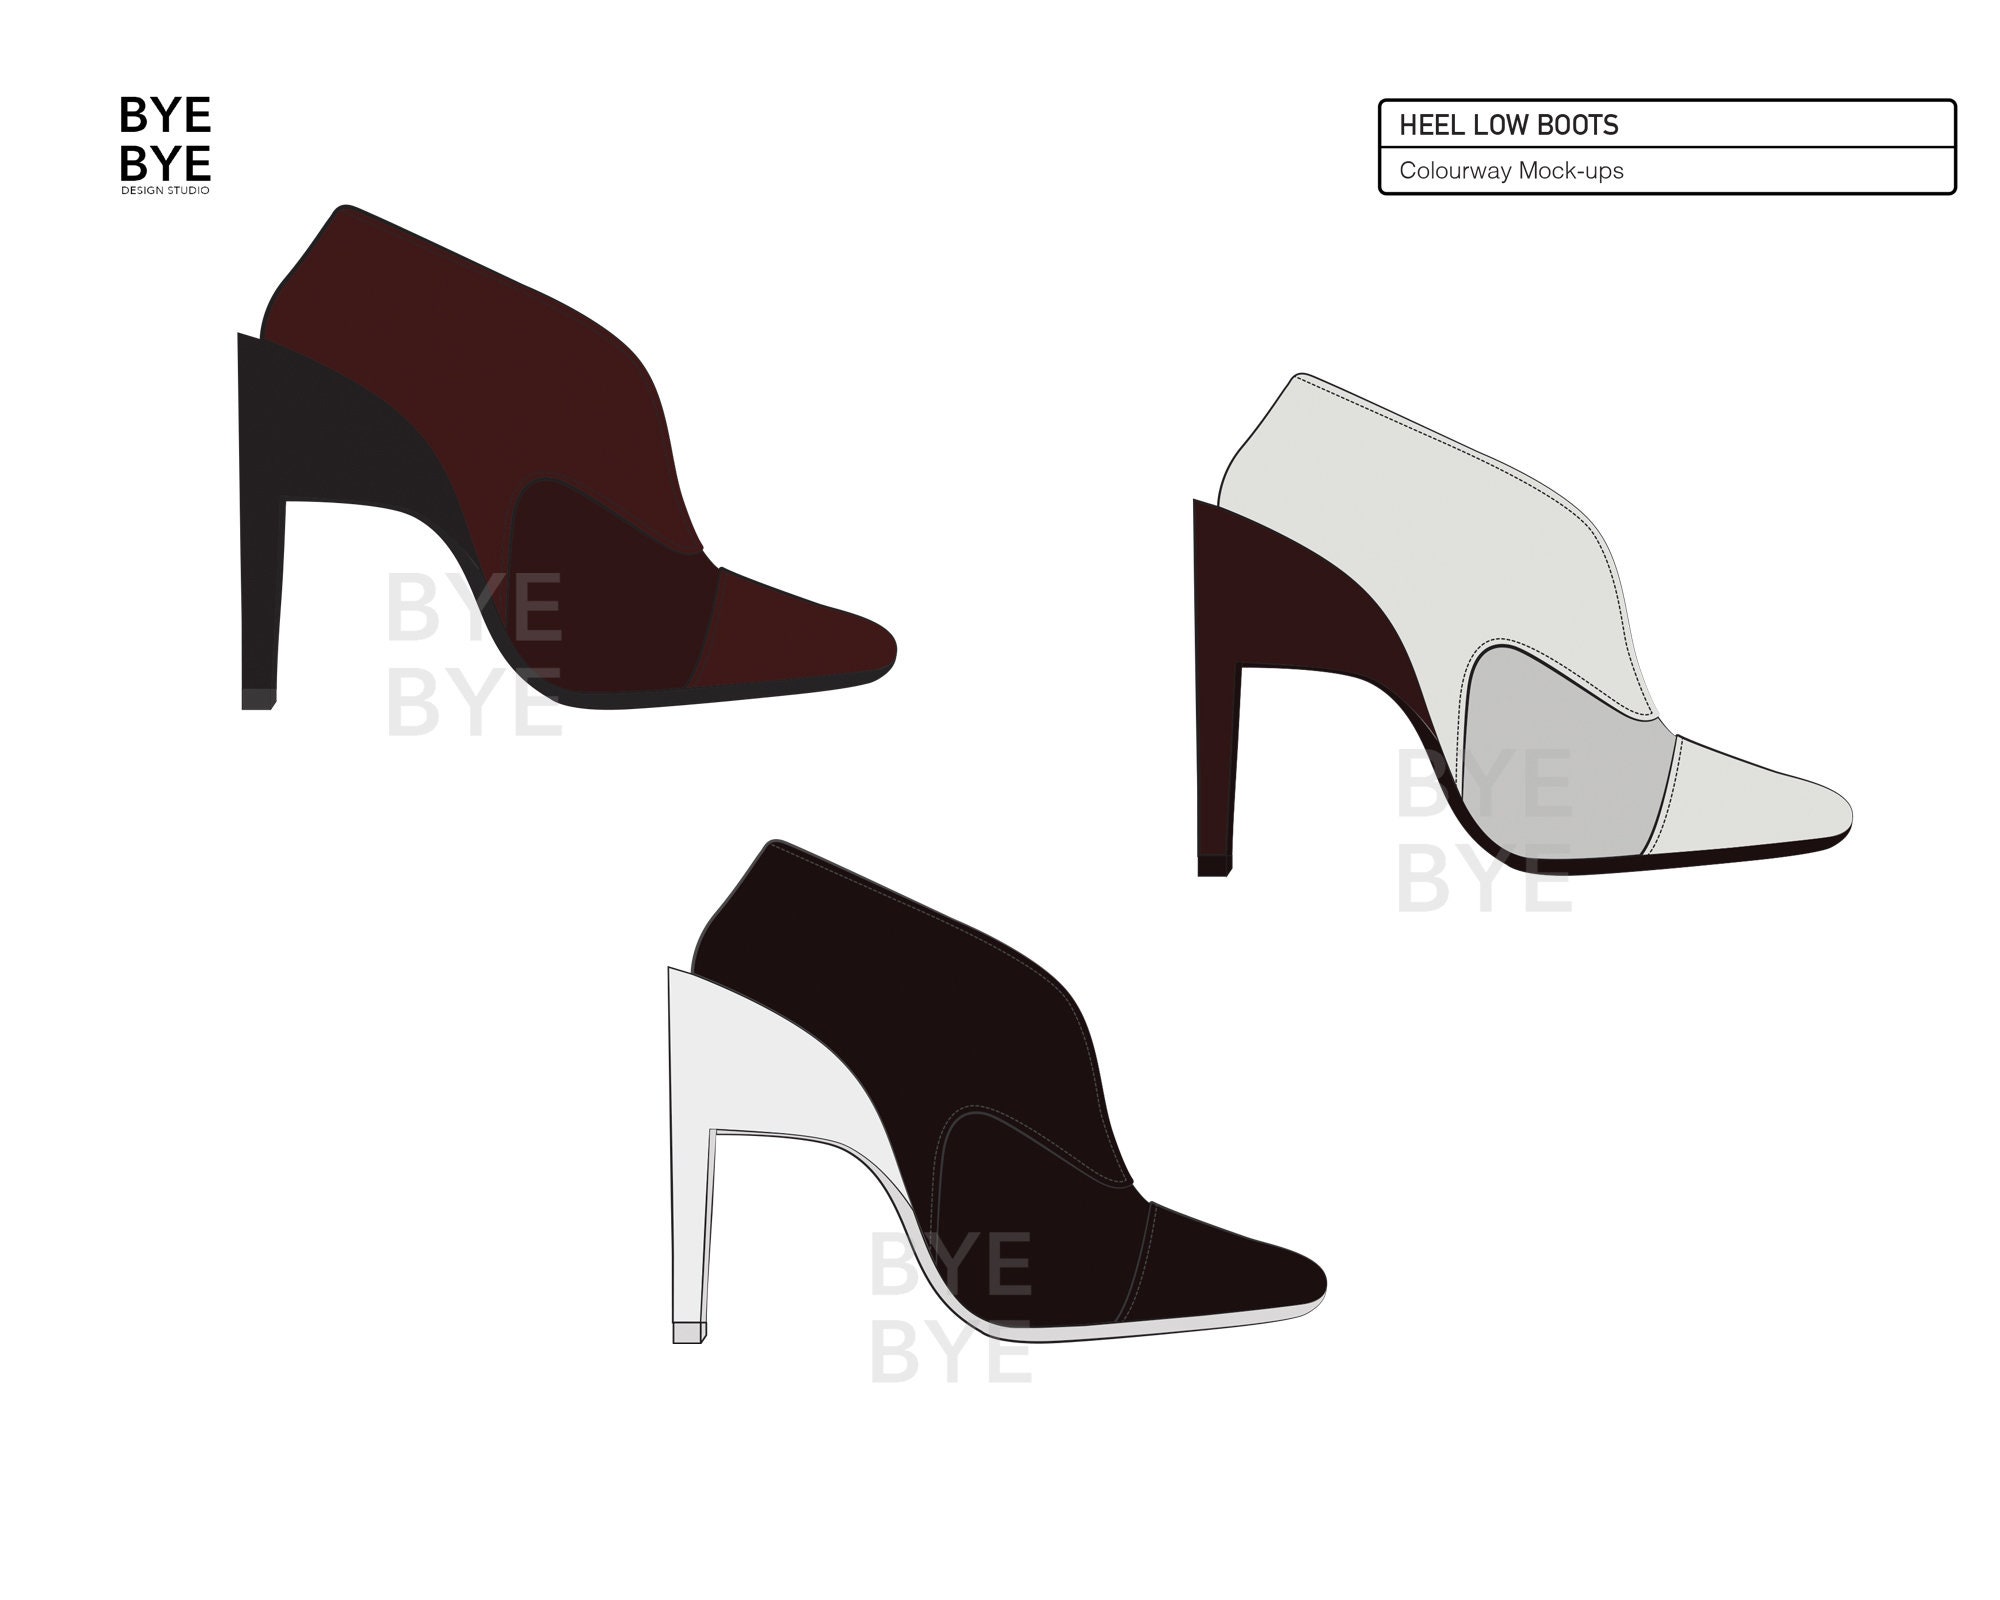 HEEL LOW Boots Fashion Design Flat Sketches to Download - Etsy